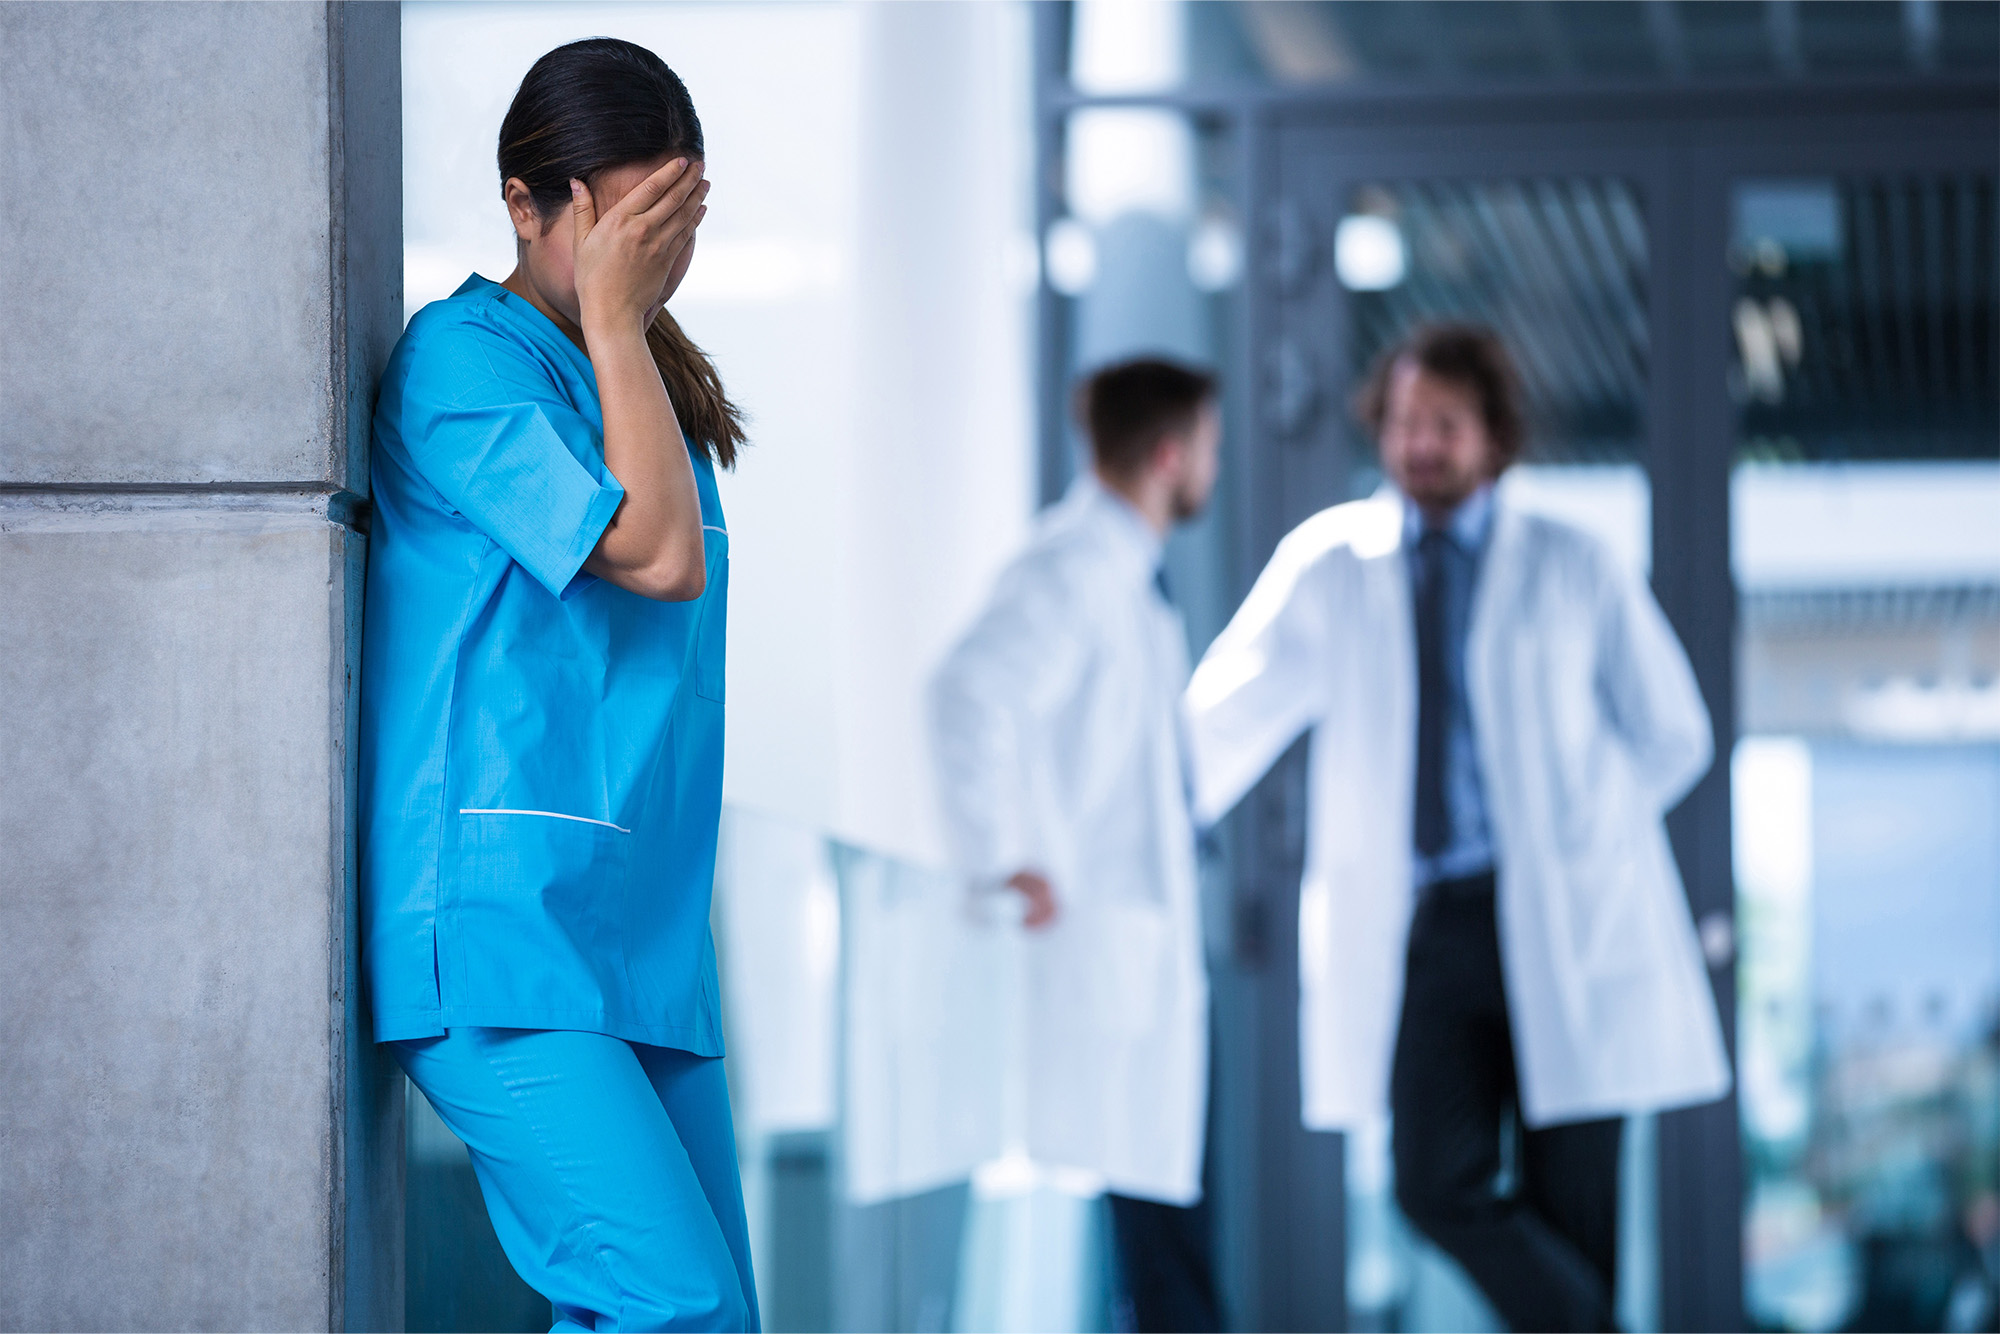 Nurse experiencing stress while two doctors converse in the background.